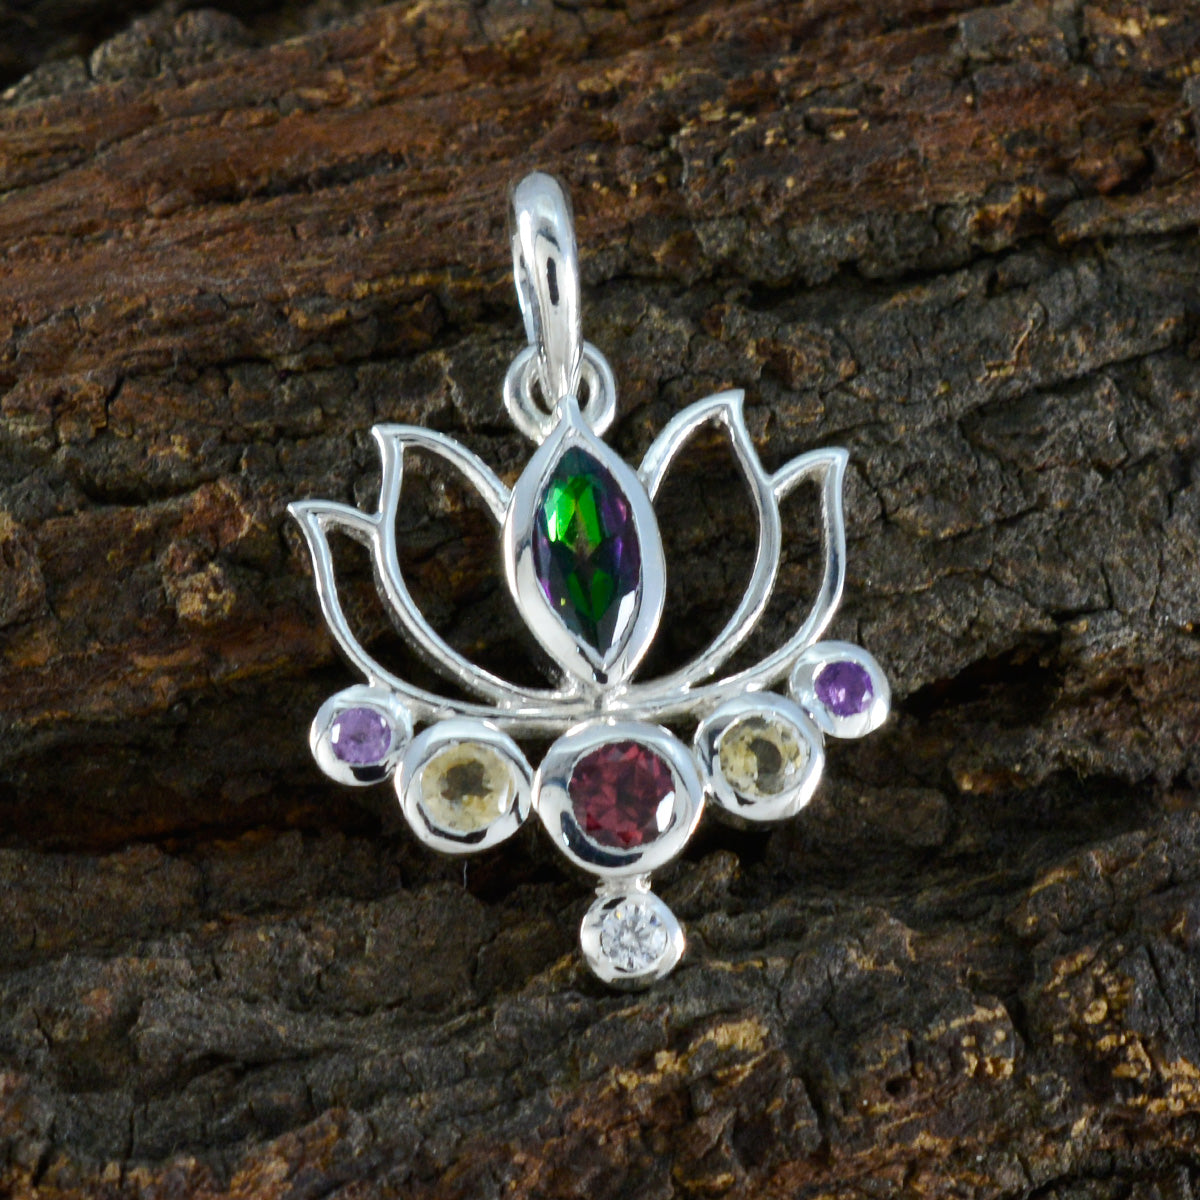 Riyo Spunky Gems Multi Faceted Multi Color Multi Stone Silver Pendant Gift For Engagement